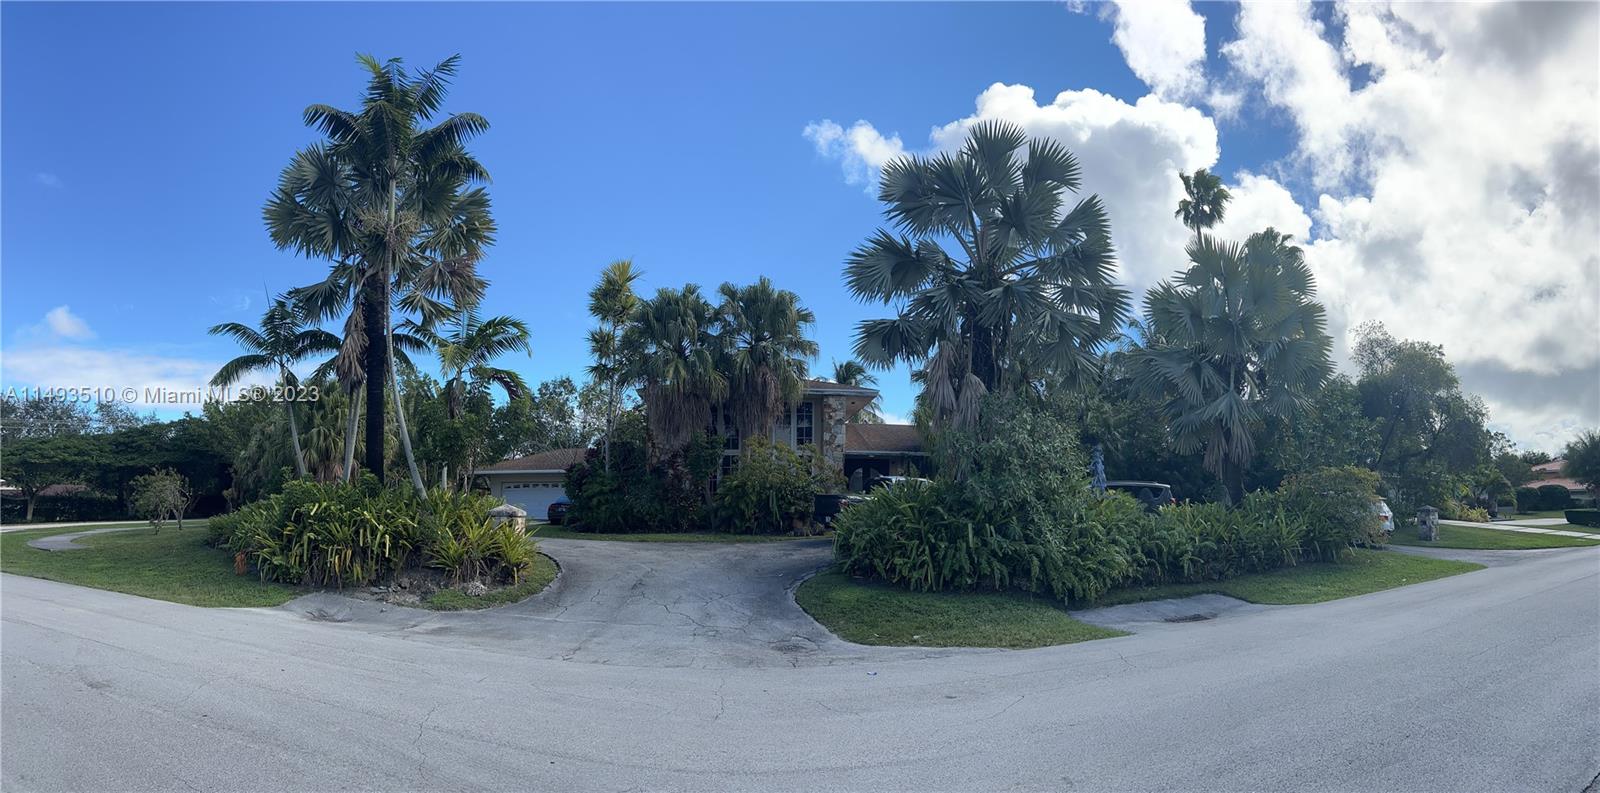 Introducing a prime investment opportunity in Palmetto Bay! This listing features a strategic location, promising returns, and a potential for growth. Ideal for investors seeking a lucrative venture in a thriving real estate market and location. Ideal also for a buyer that seeks a property with value add with some tlc.